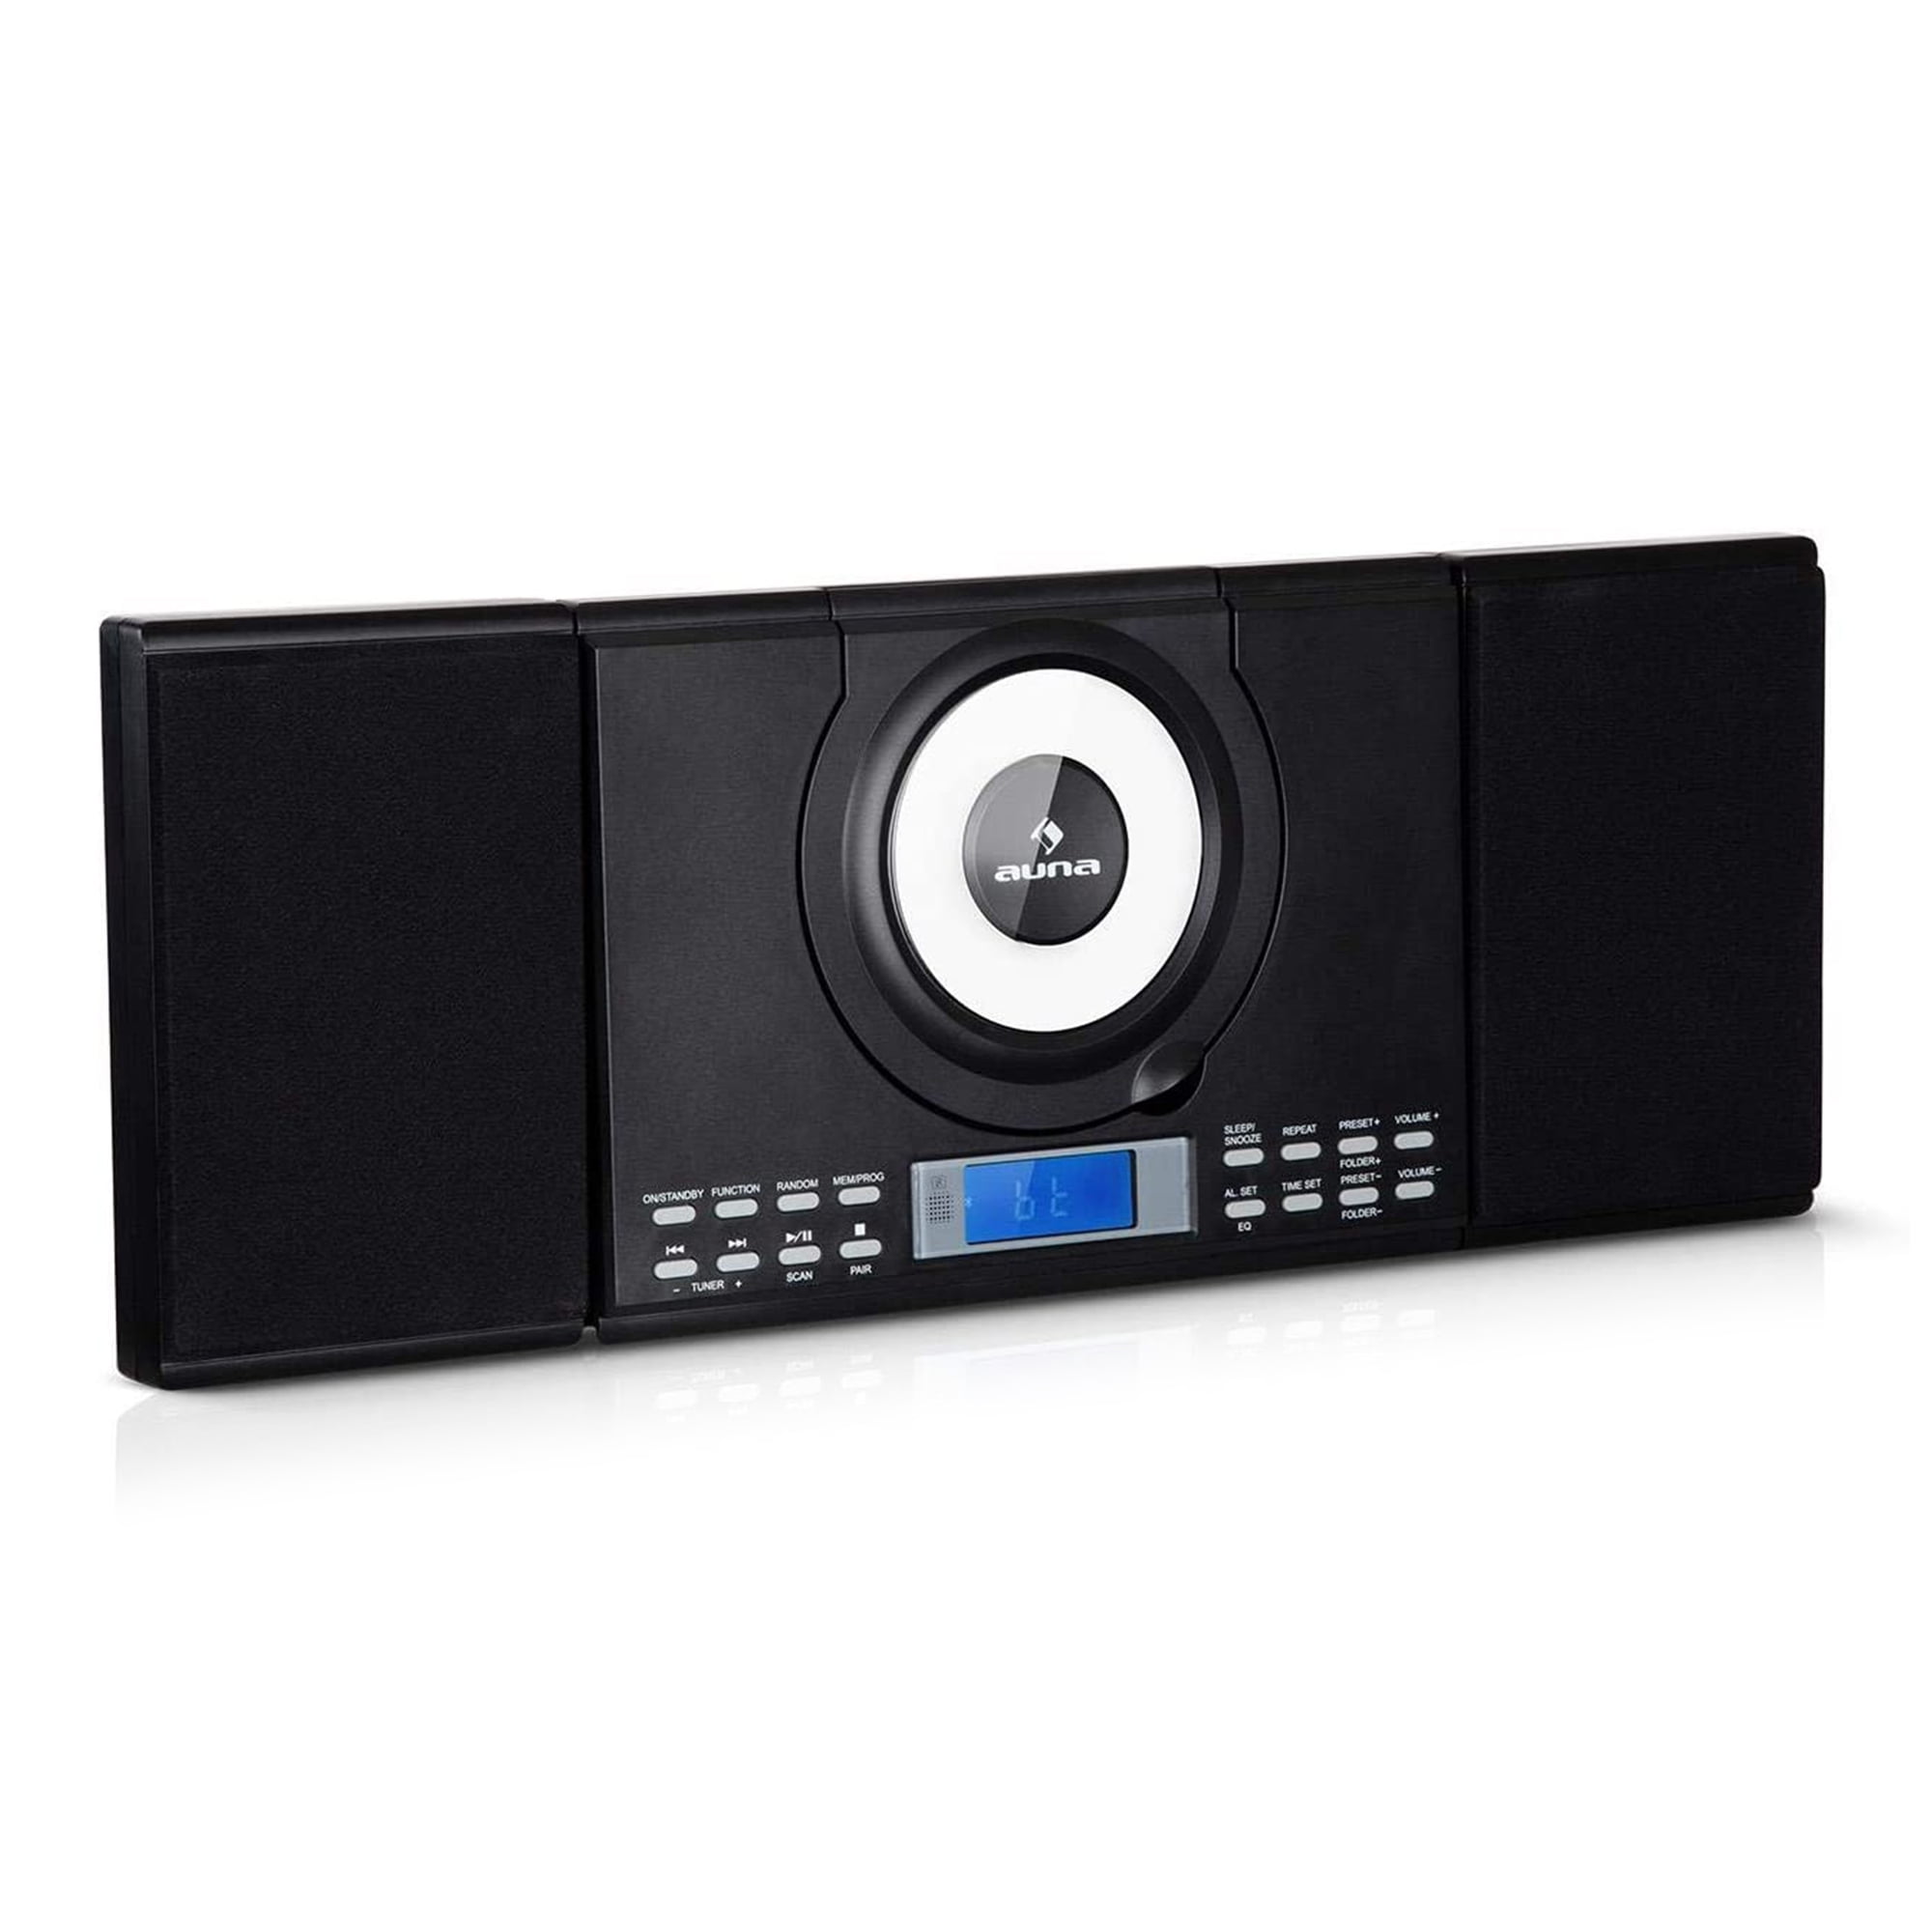 AUNA Stereosonic Microsystem, Shelf Stereo System, Micro System, 2 Stereo  Speakers, Front-Loading CD Player, FM Tuner, Bluetooth, Wireless  Connection